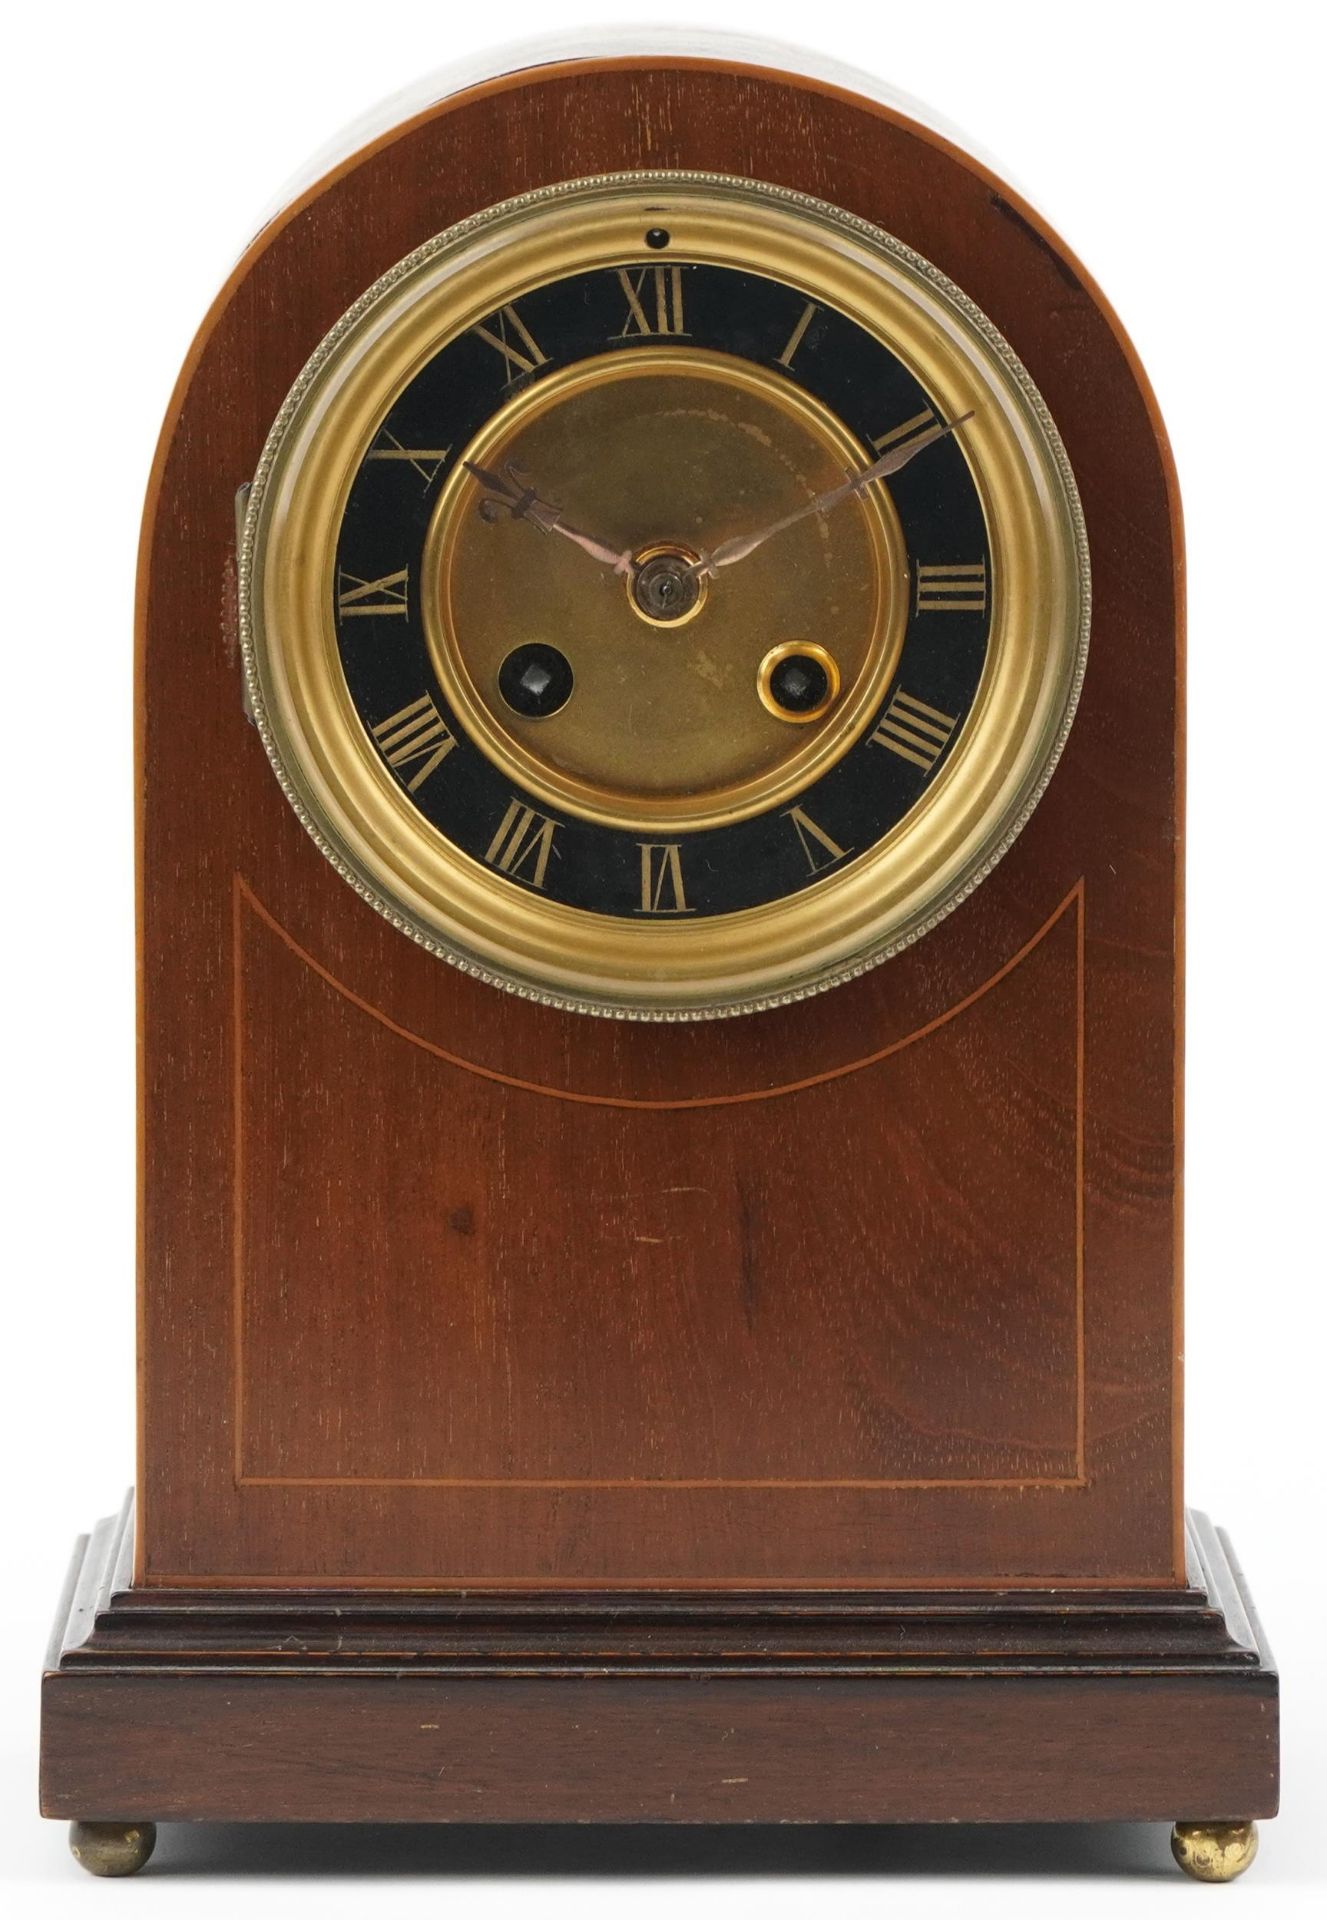 Edwardian inlaid mahogany dome top mantle clock with painted chapter ring having Roman numerals, - Image 2 of 6